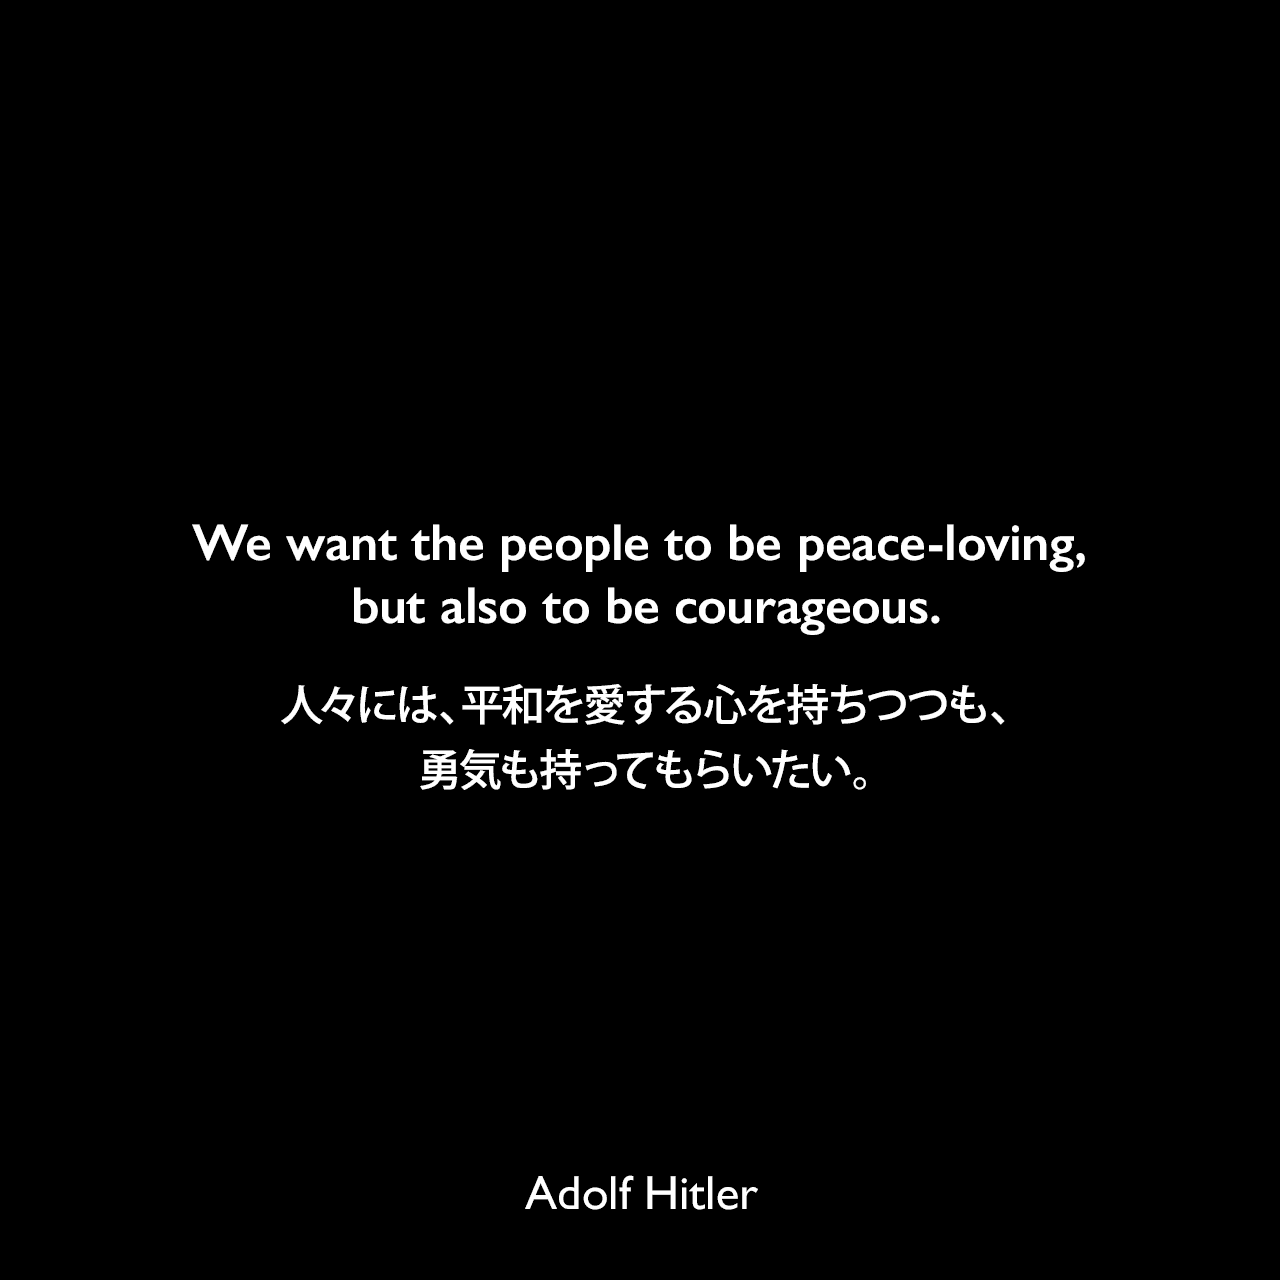 We want the people to be peace-loving, but also to be courageous.人々には、平和を愛する心を持ちつつも、勇気も持ってもらいたい。Adolf Hitler